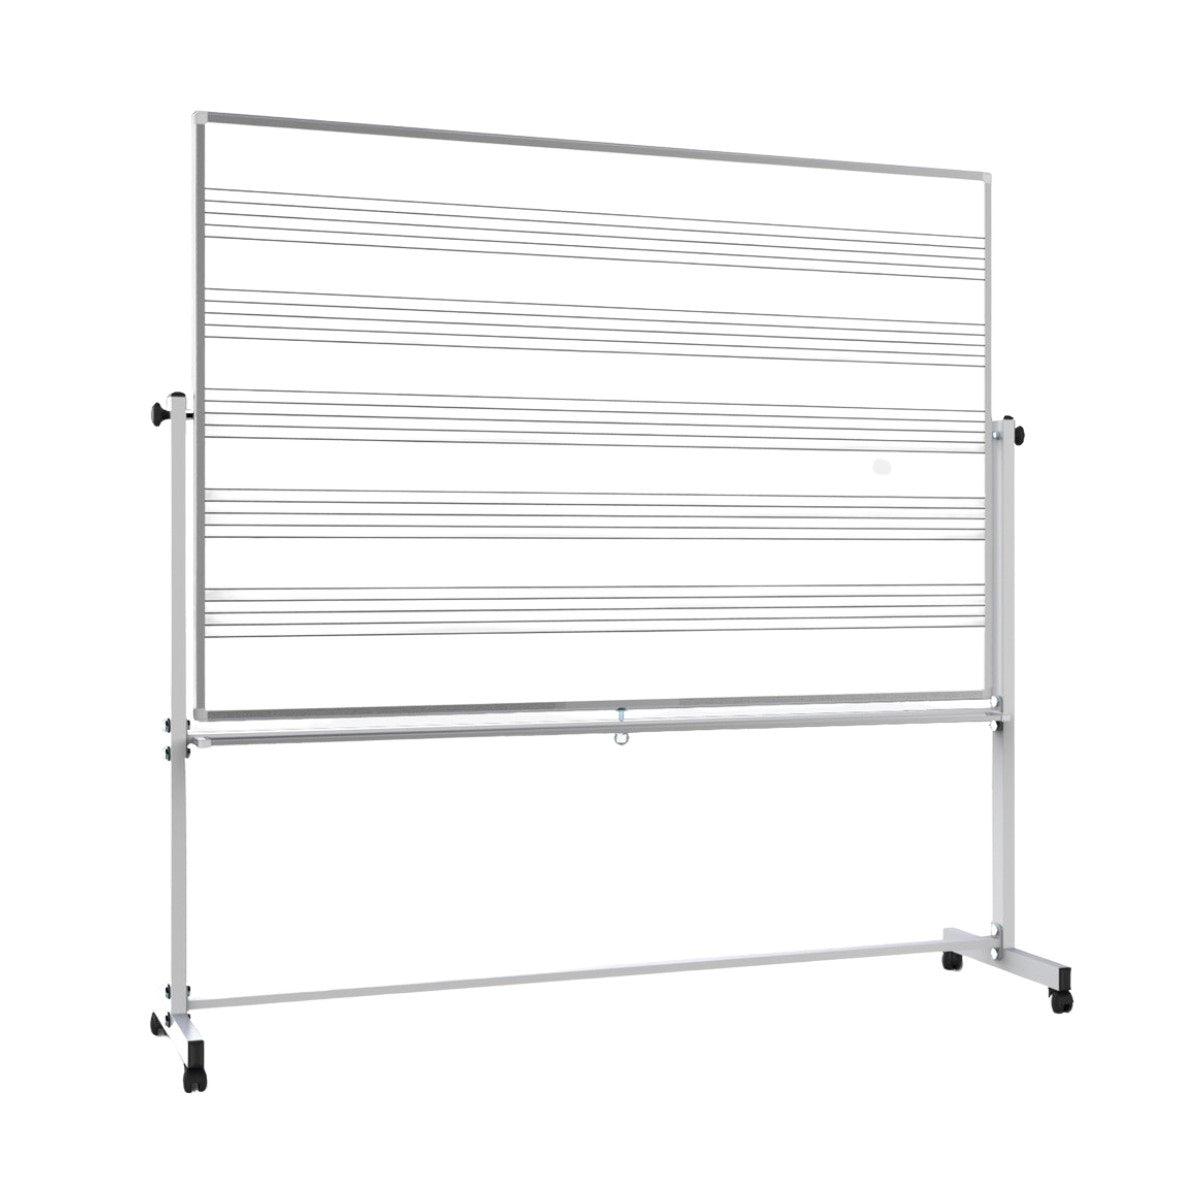 Mobile Double-Sided Combination Magnetic Music Whiteboard/Whiteboard, 72" W x 48" H